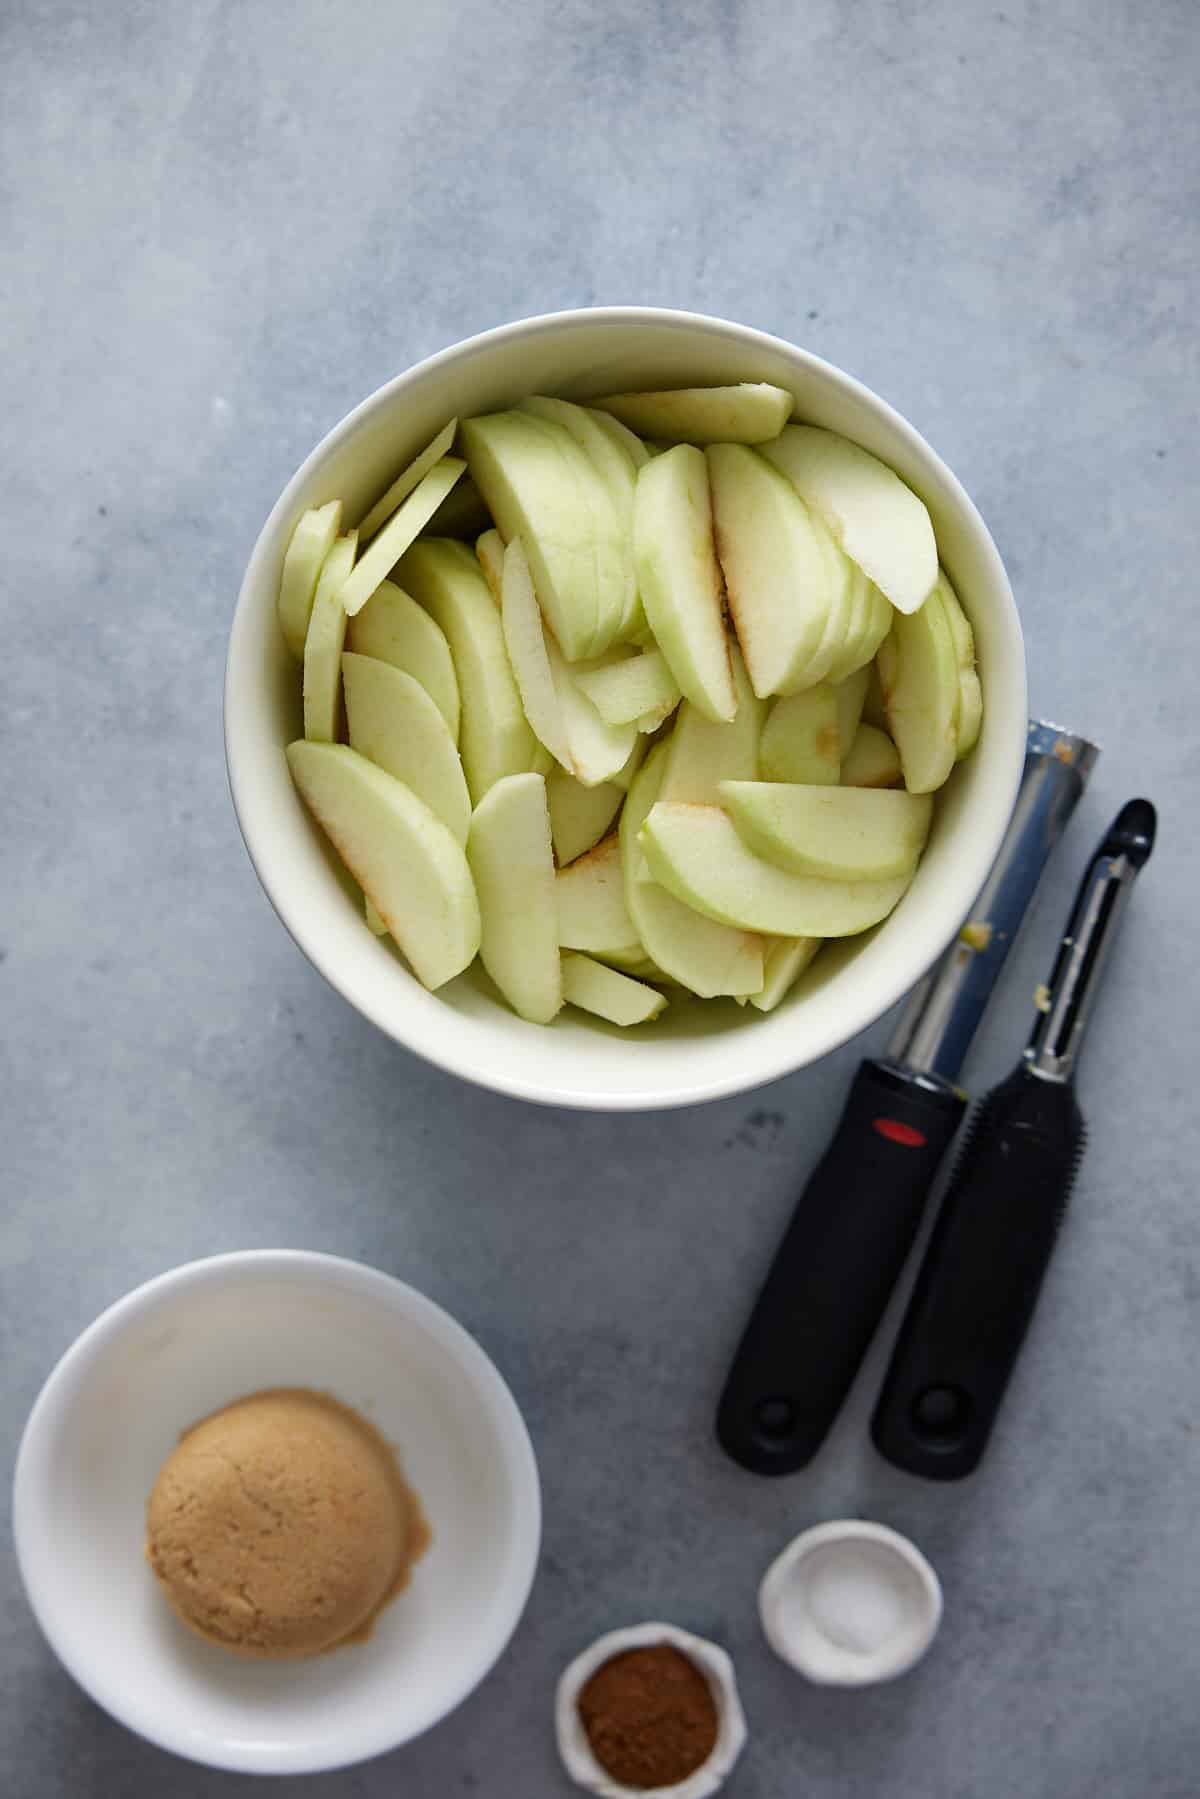 Recipe ingredients for fried apples set out in white bowls on a marble surface with apple peeler and corer set alongside